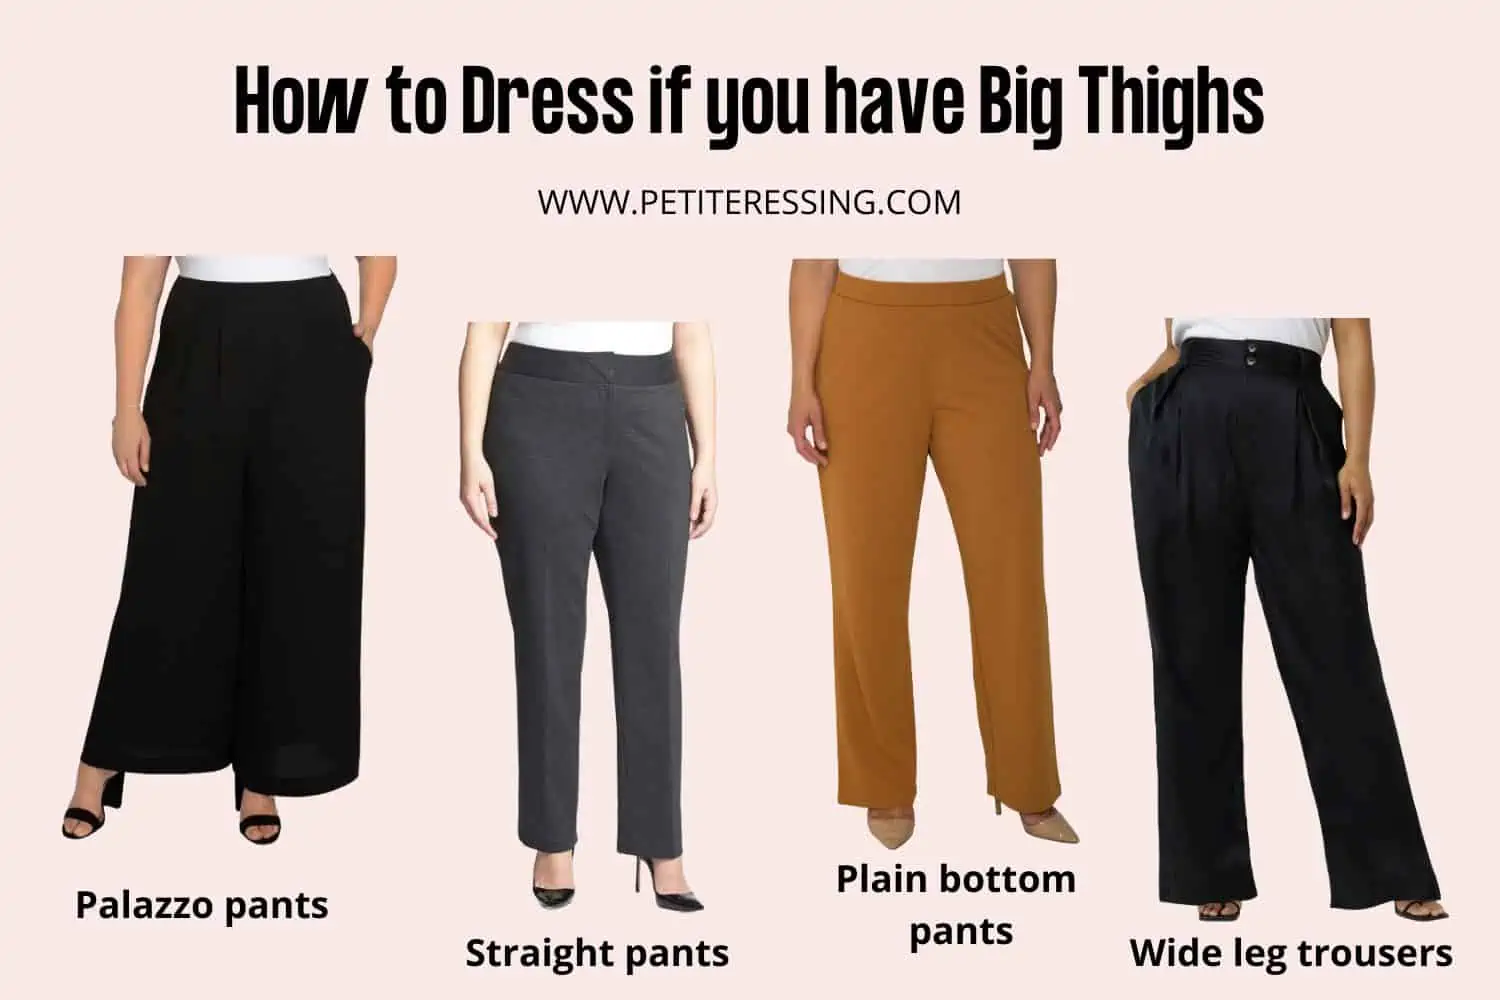 What to wear if you want to hide fat thighs - SewGuide